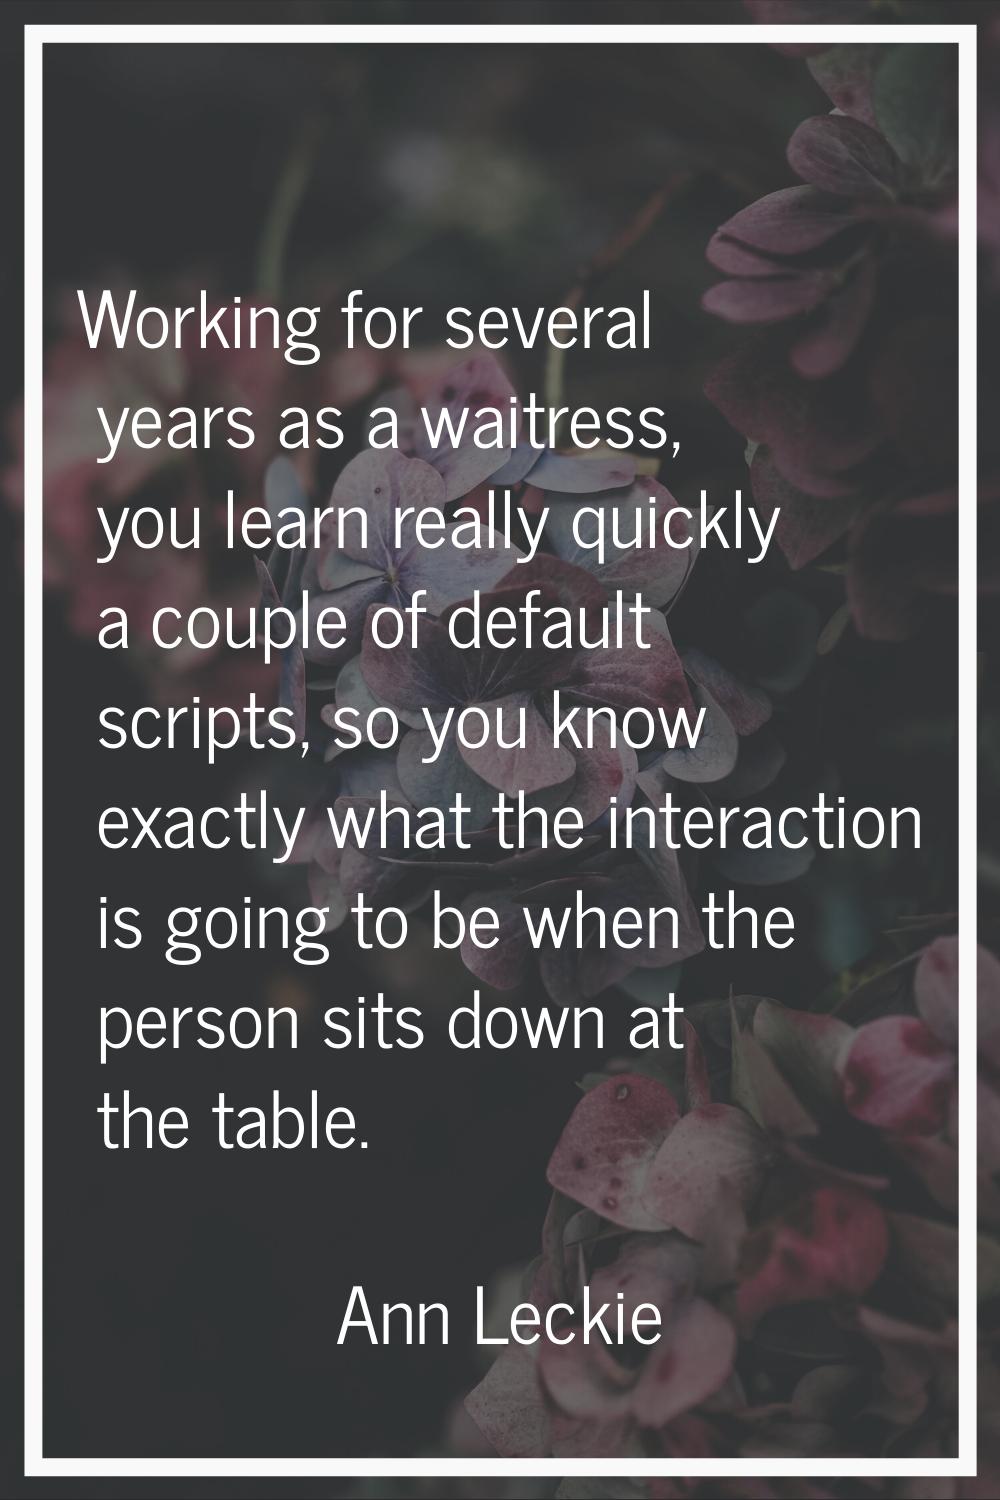 Working for several years as a waitress, you learn really quickly a couple of default scripts, so y